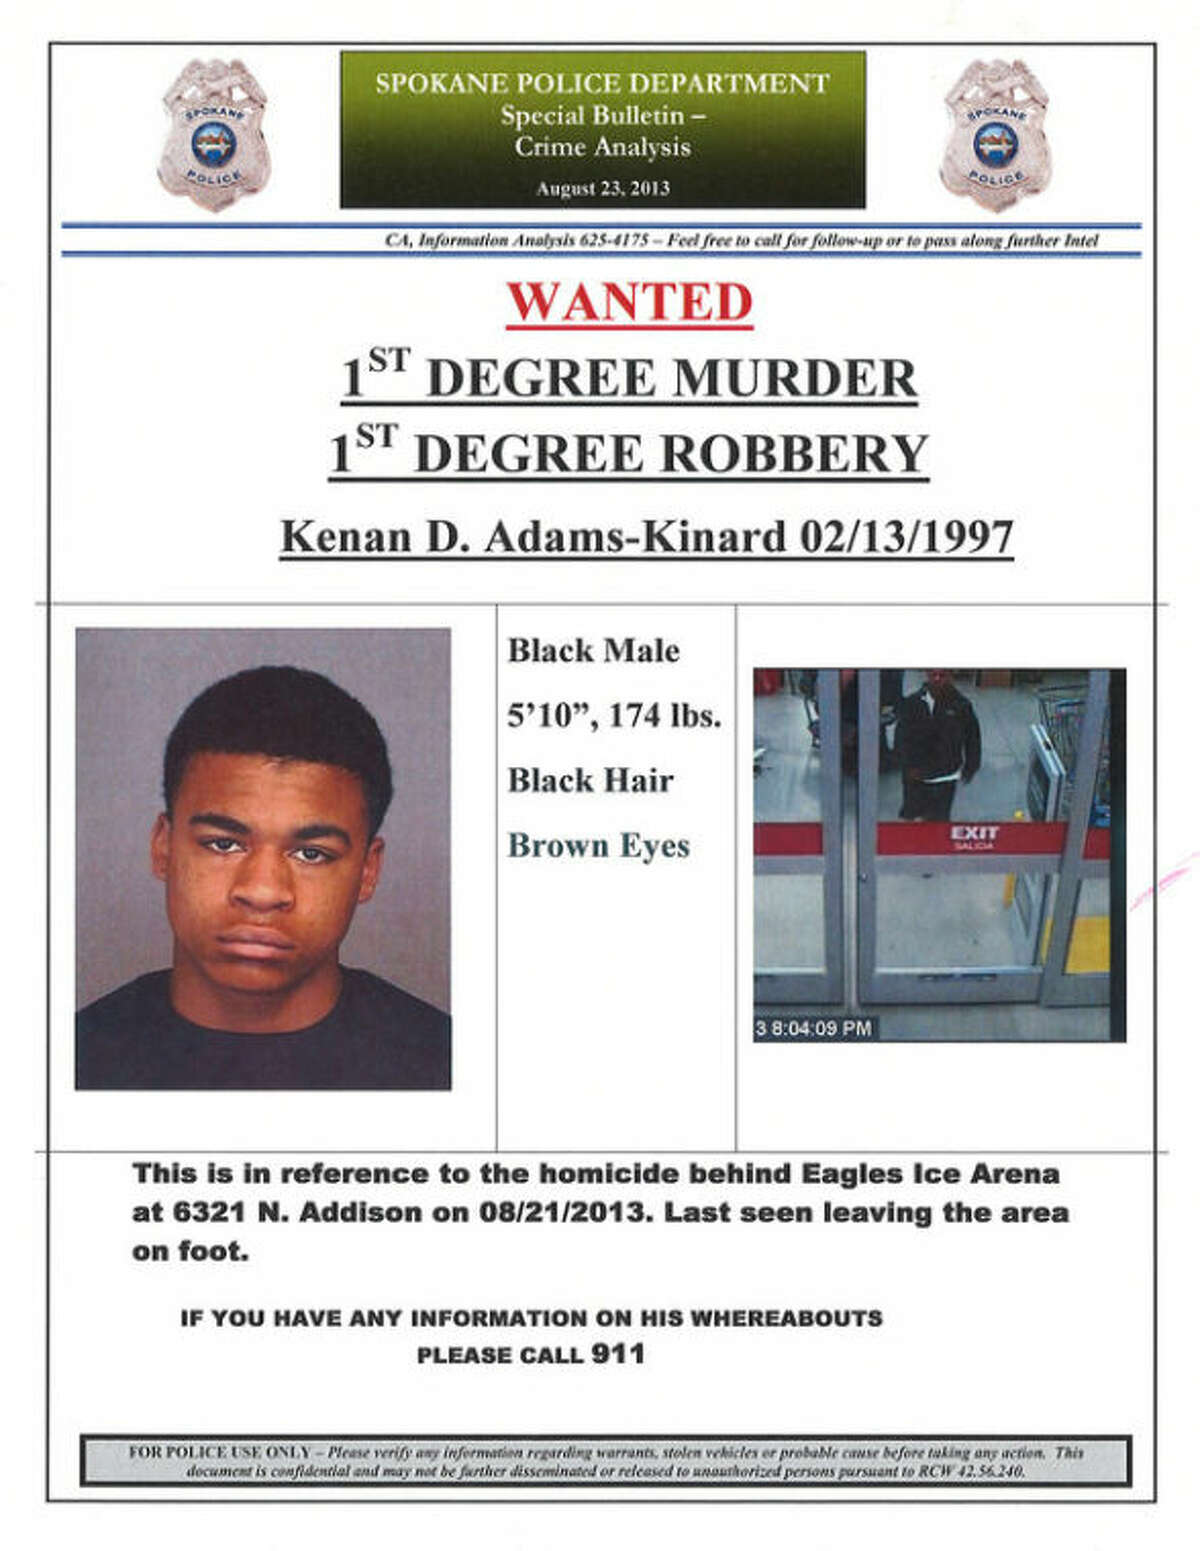 This image provided by the Spokane, Wash., Police Department shows a wanted poster for Kenan Adams-Kinard, 16, who is being sought by police in connection with the beating death of an 88-year-old World War II veteran outside an Eagles lodge in Spokane Wednesday, Aug. 21, 2013. Police say they have arrested one of two teens suspected of fatally beating Delbert Belton in his car at random Wednesday night outside the lodge as he was waiting for a friend. Belton was found with serious head injuries and died in the hospital Thursday. (AP Photo/Spokane Police)